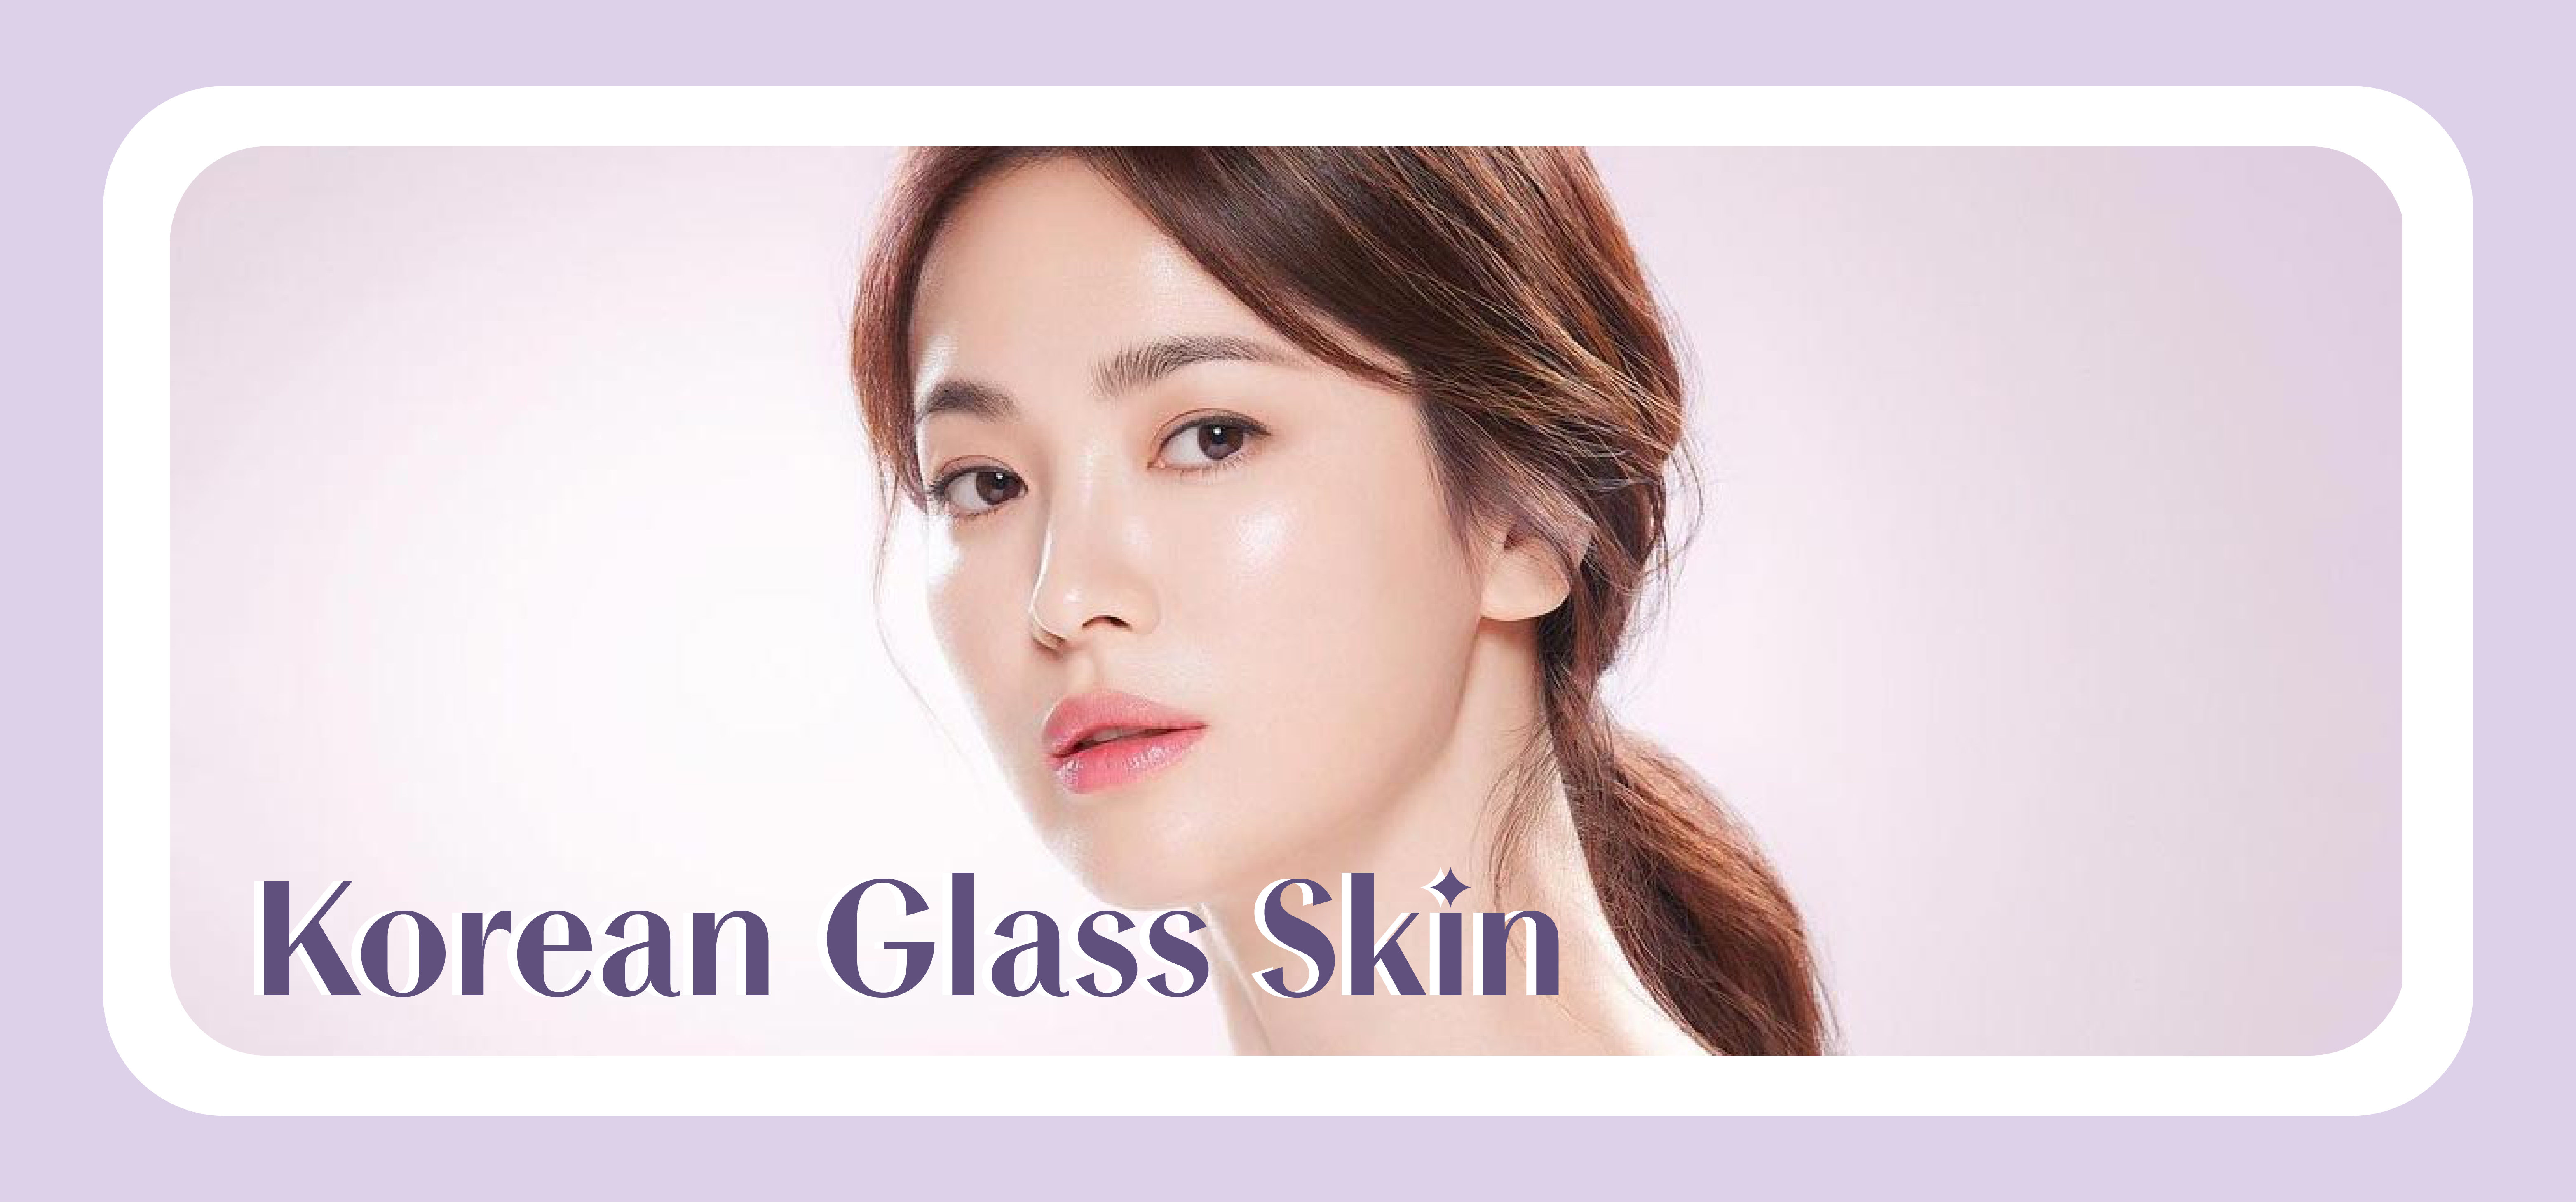 What Is Korean 'Glass Skin', and How Do You Achieve It?